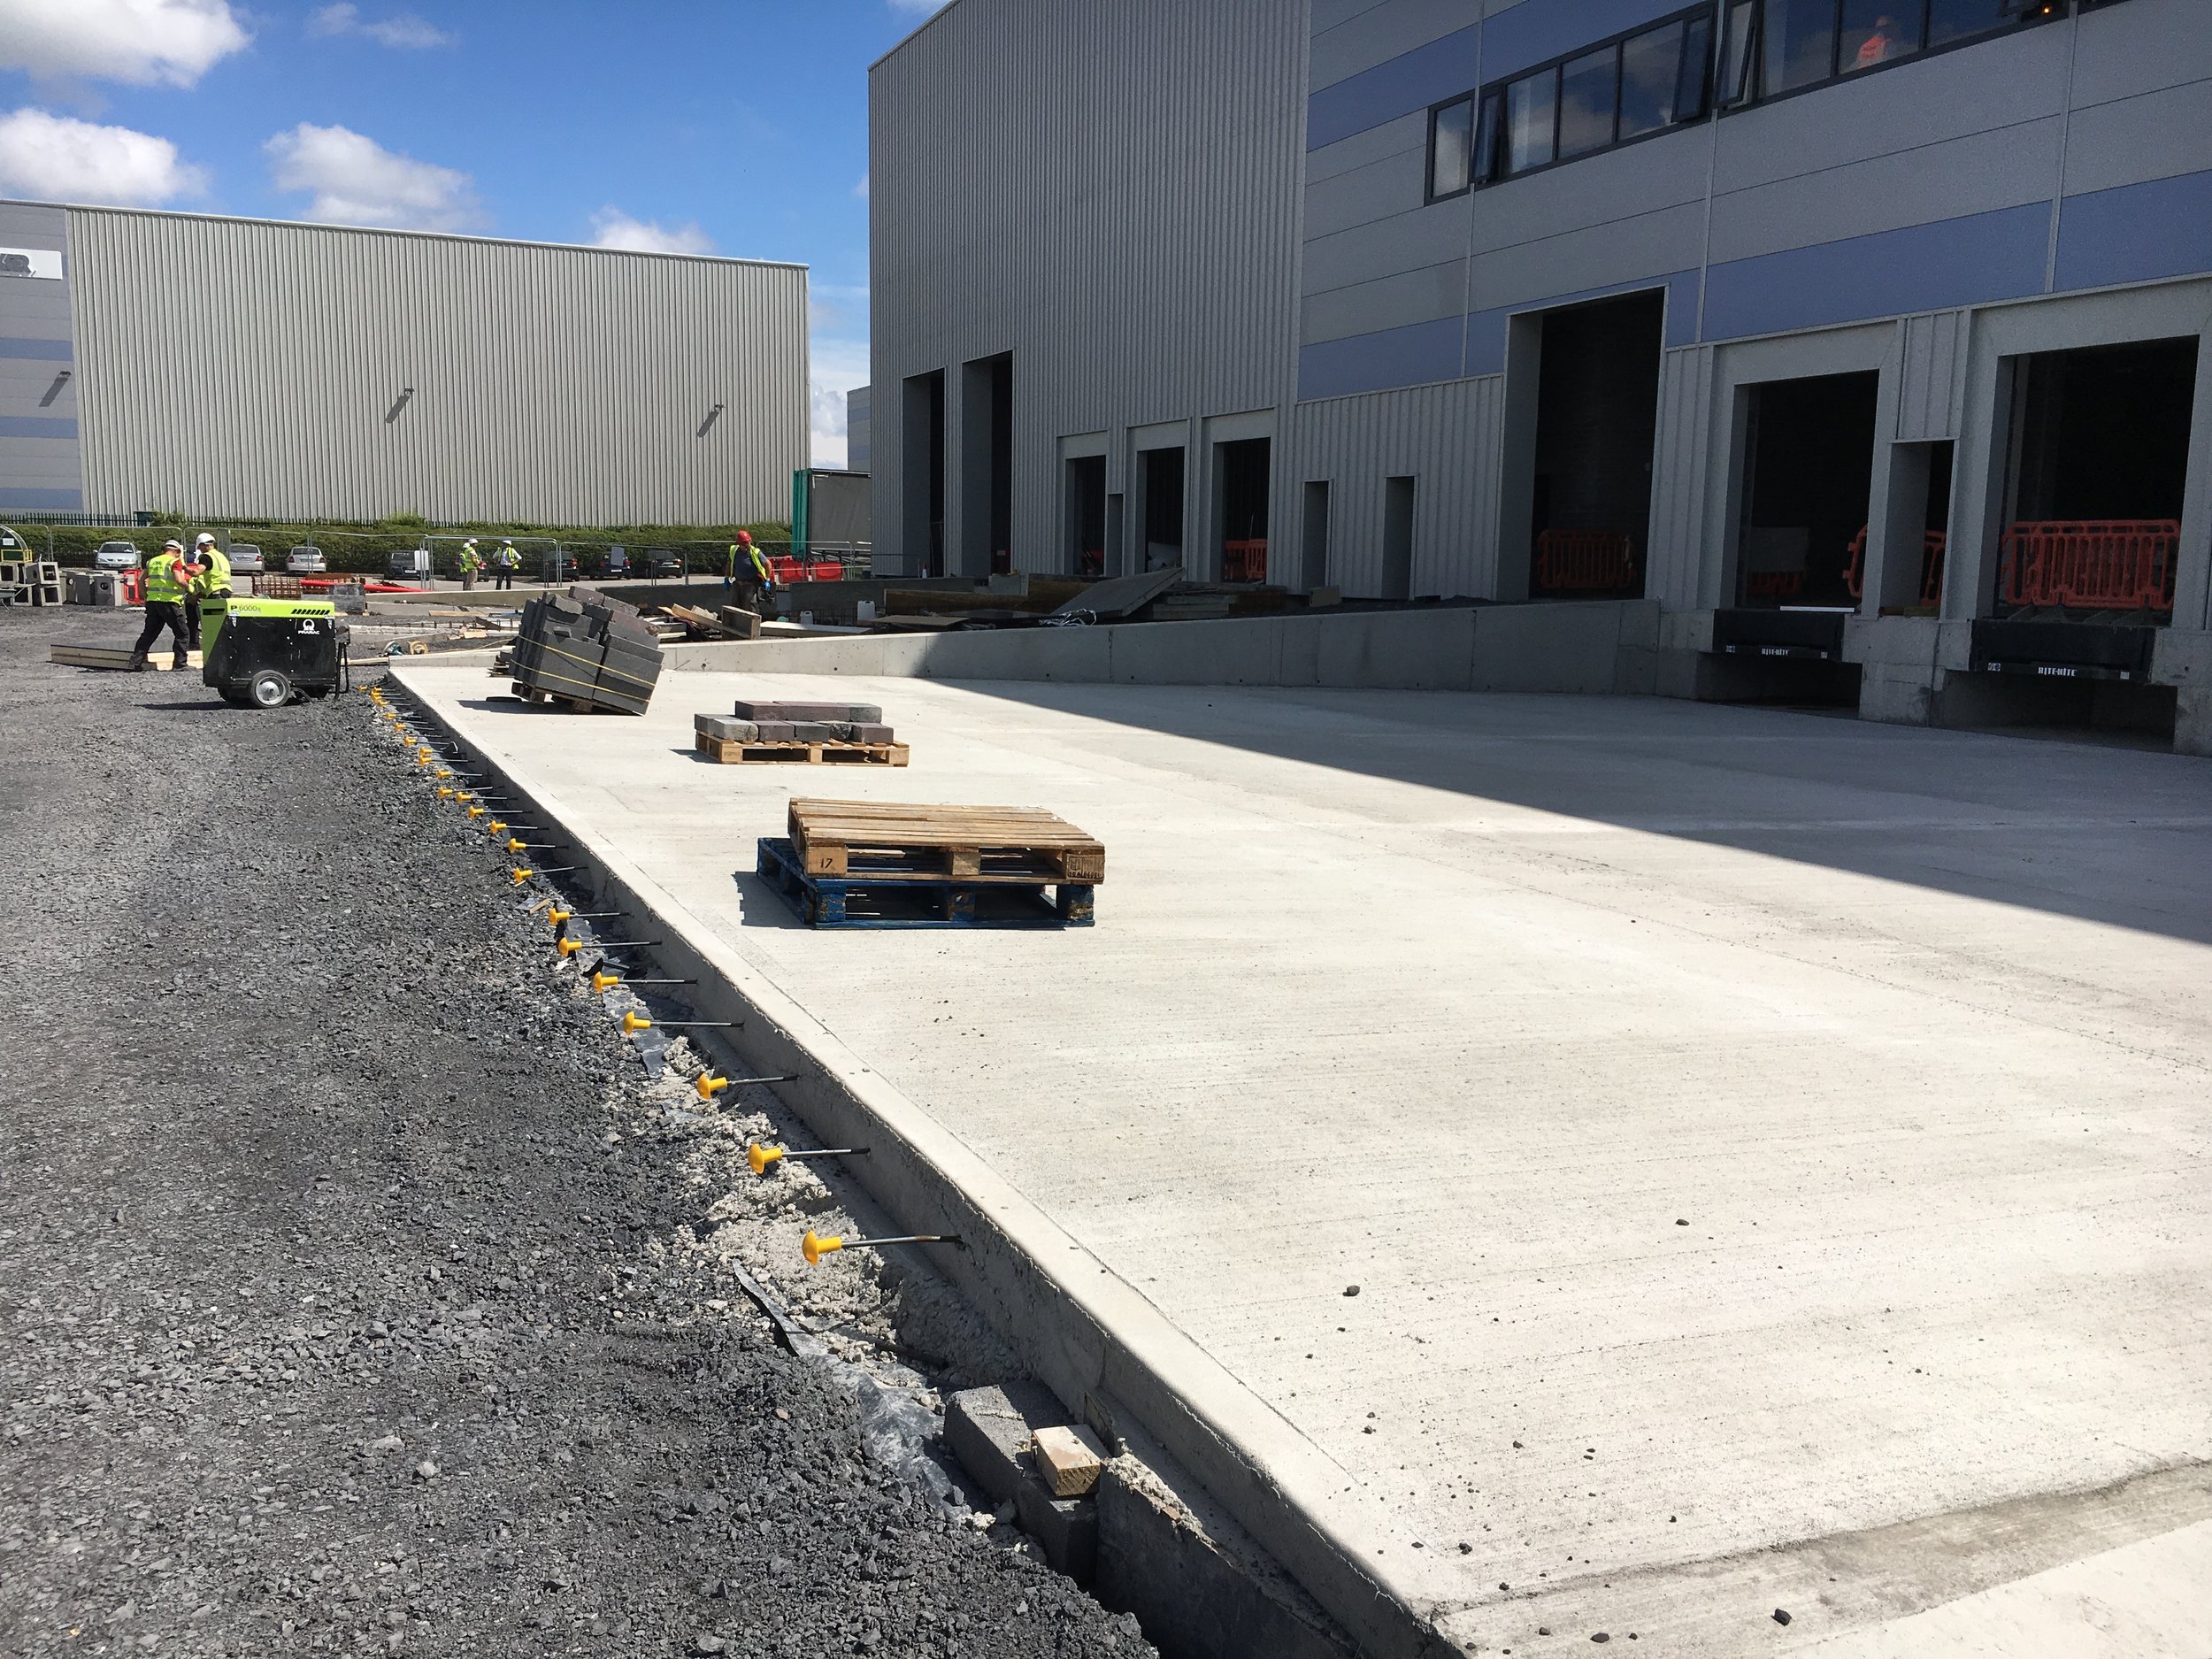 Castlebrowne's Project - Greenogue Warehouse Construction Phase